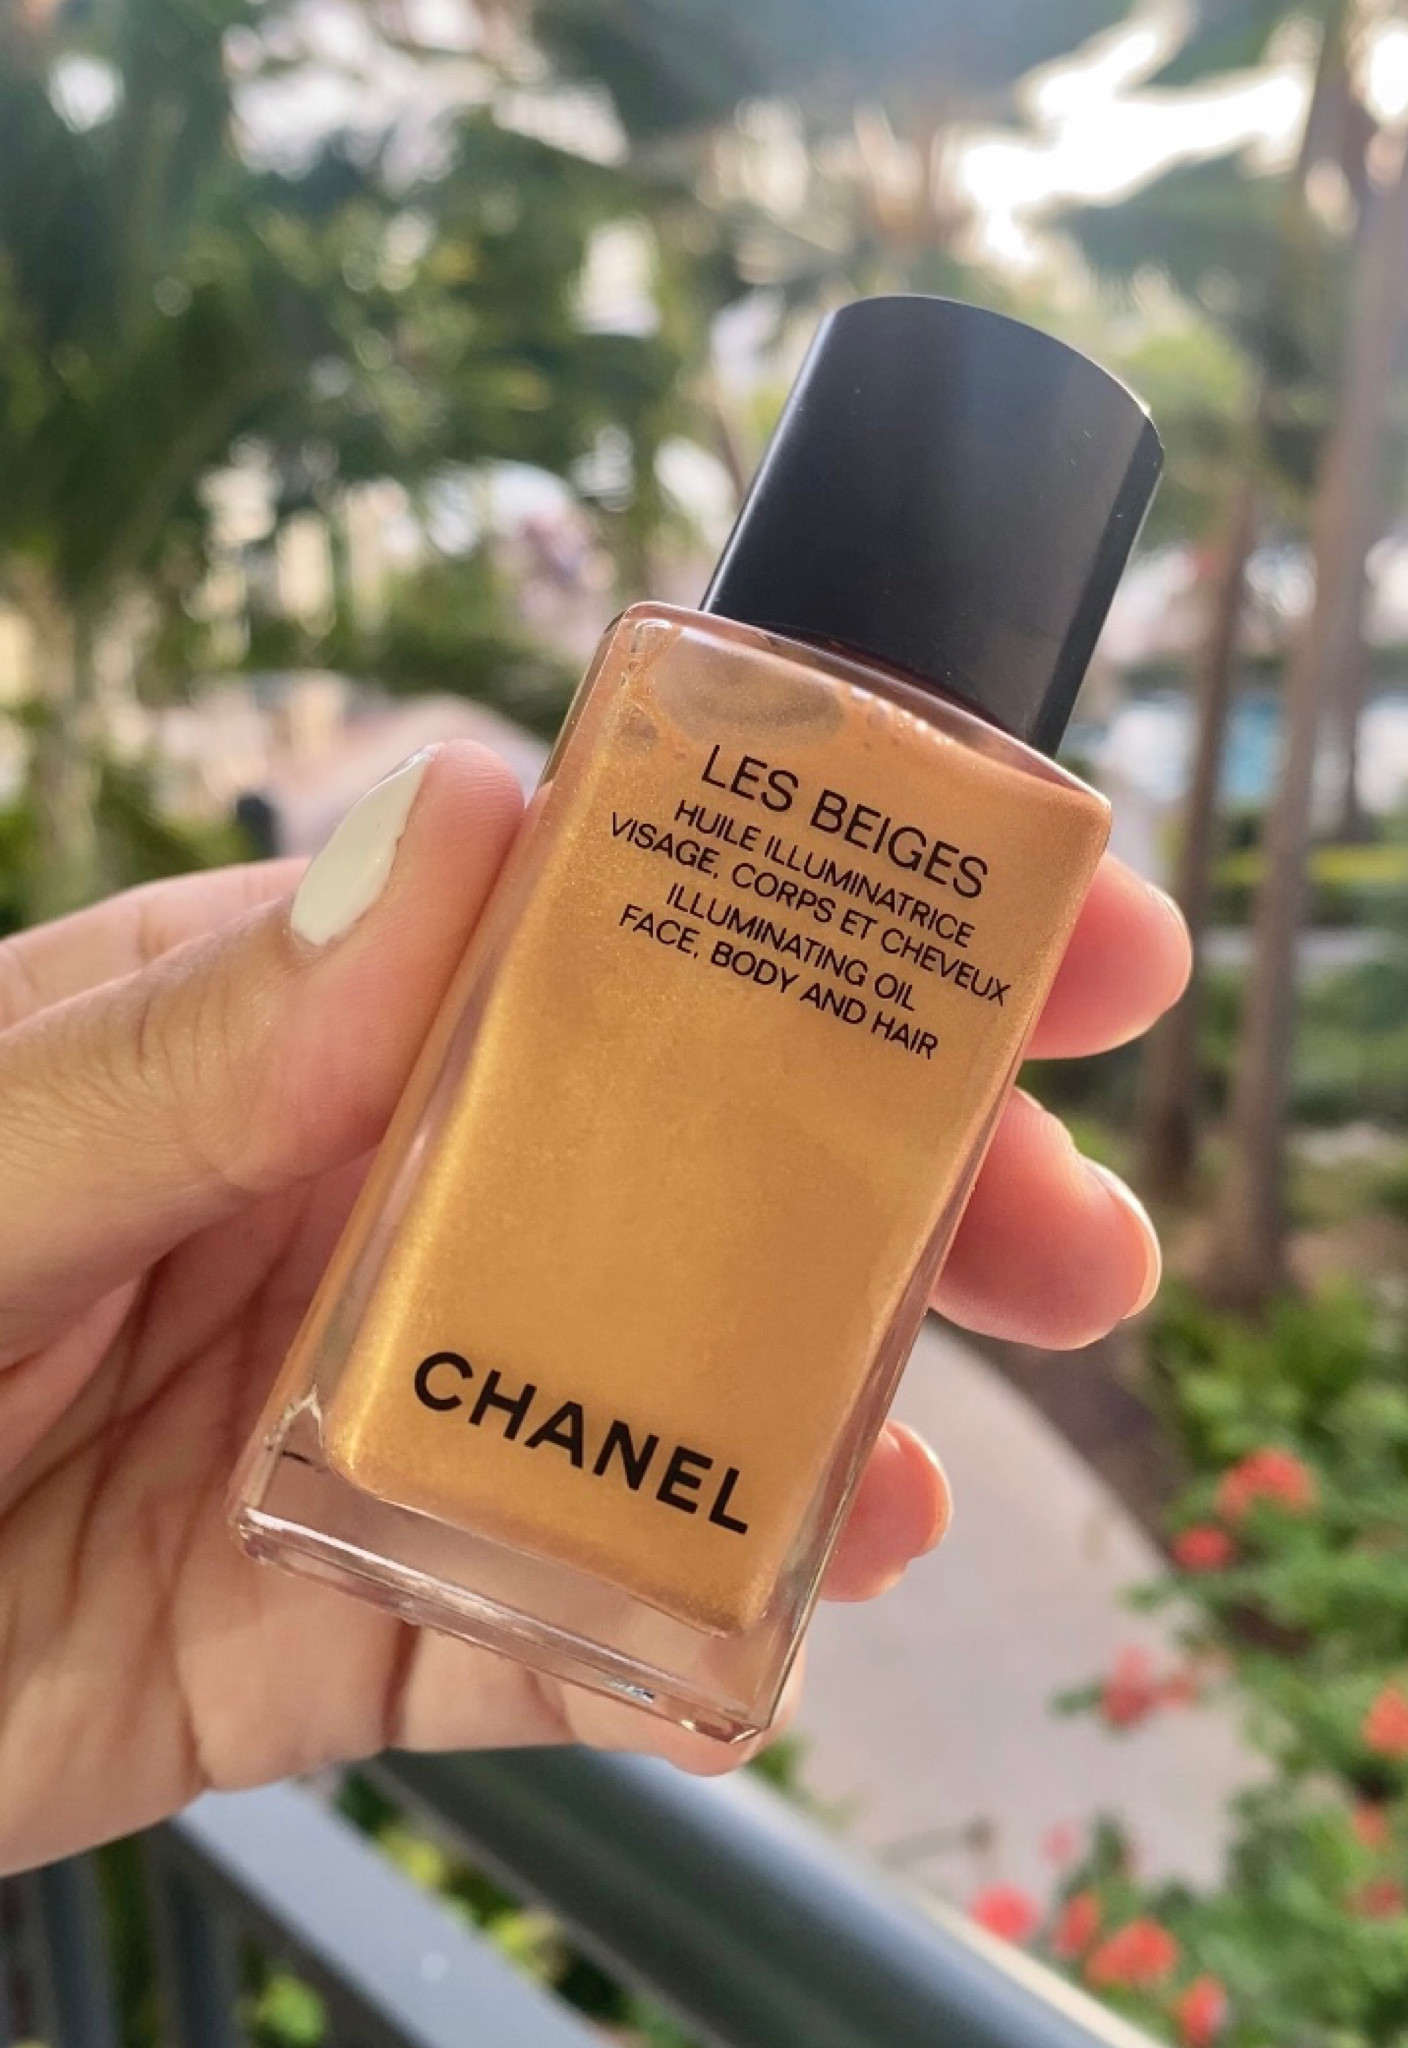 Chanel Las Beiges Illuminating Oil Face, Body And Hair